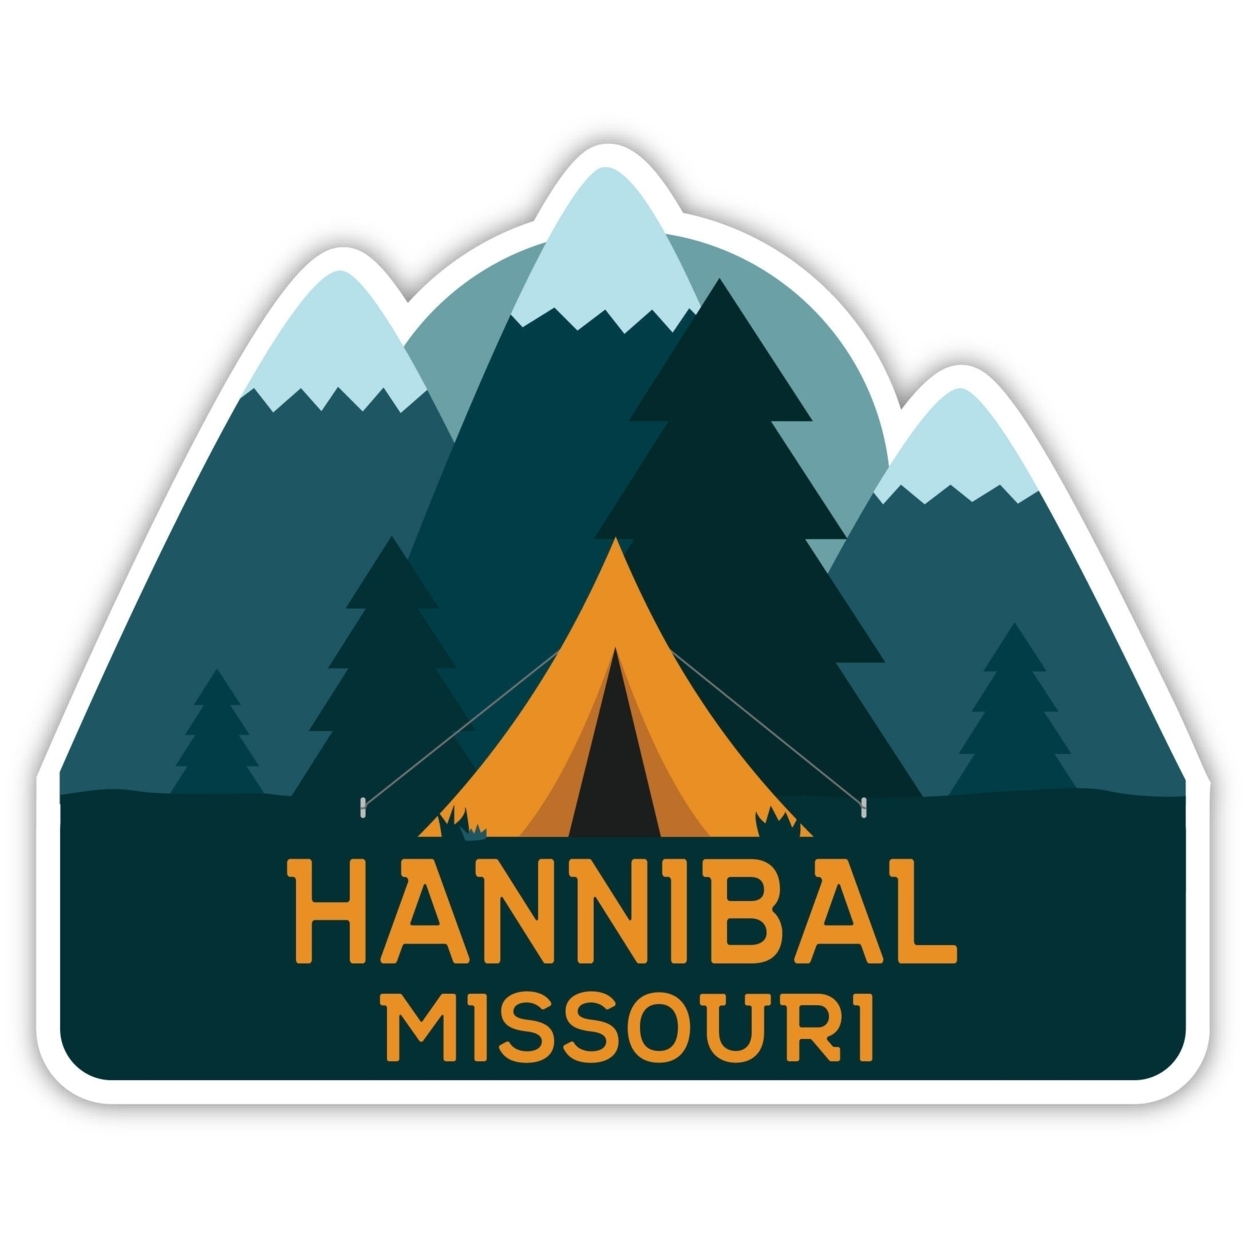 Hannibal Missouri Souvenir Decorative Stickers (Choose Theme And Size) - 4-Pack, 2-Inch, Camp Life